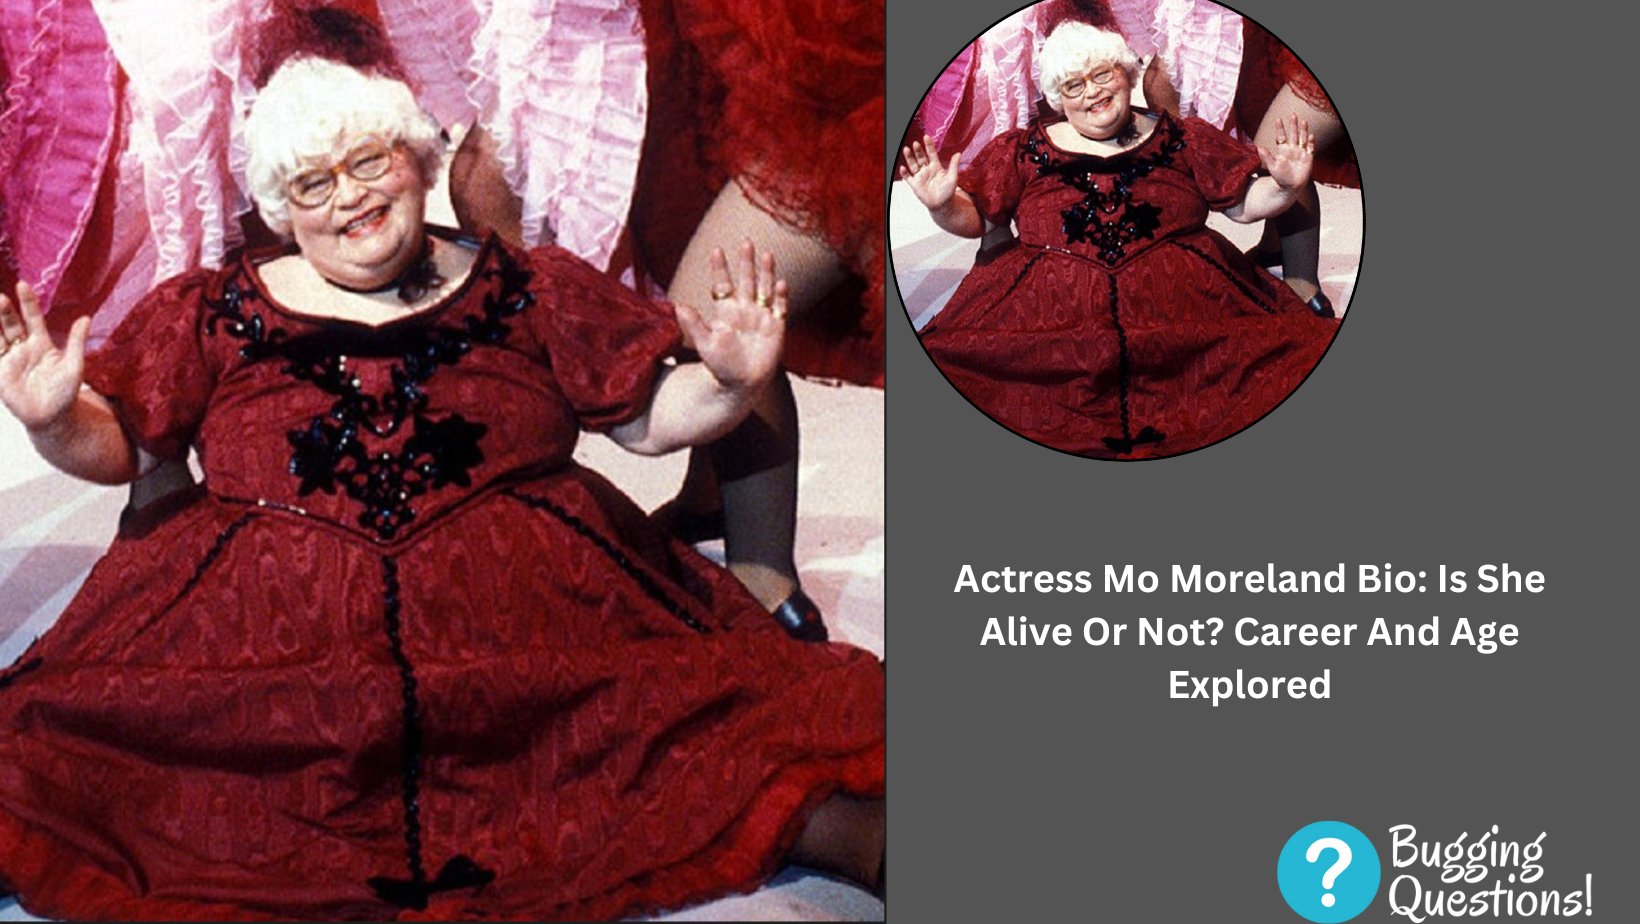 Actress Mo Moreland Bio: Is She Alive Or Not?